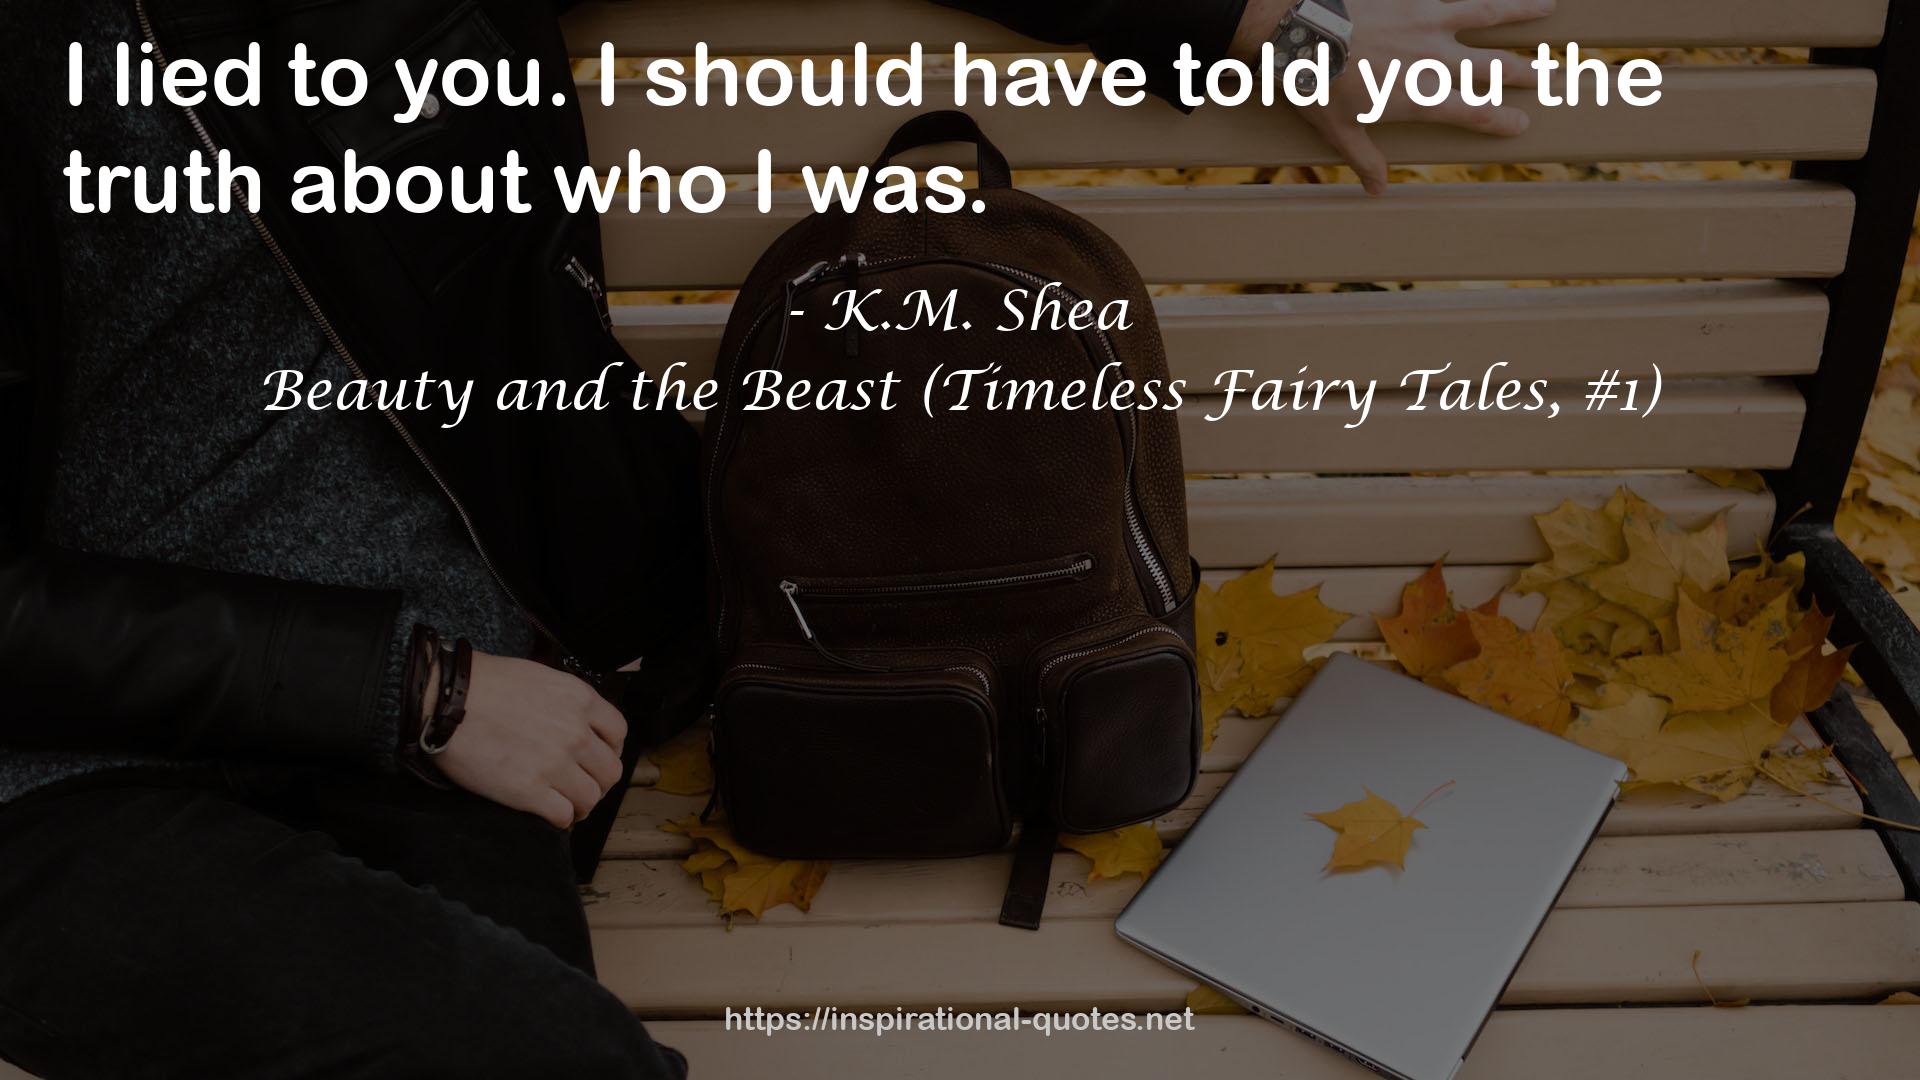 Beauty and the Beast (Timeless Fairy Tales, #1) QUOTES